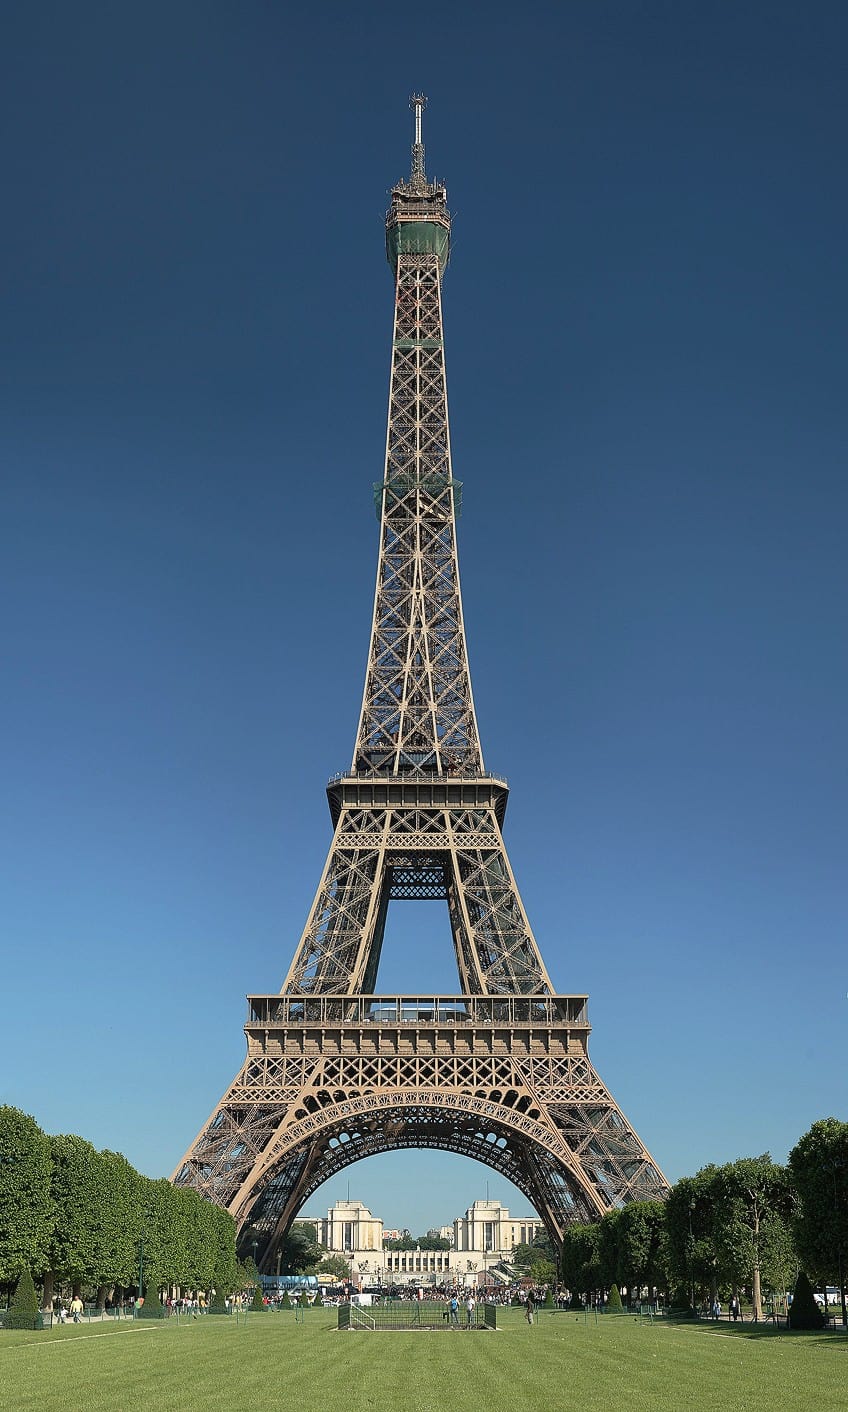 Eiffel Tower Facts